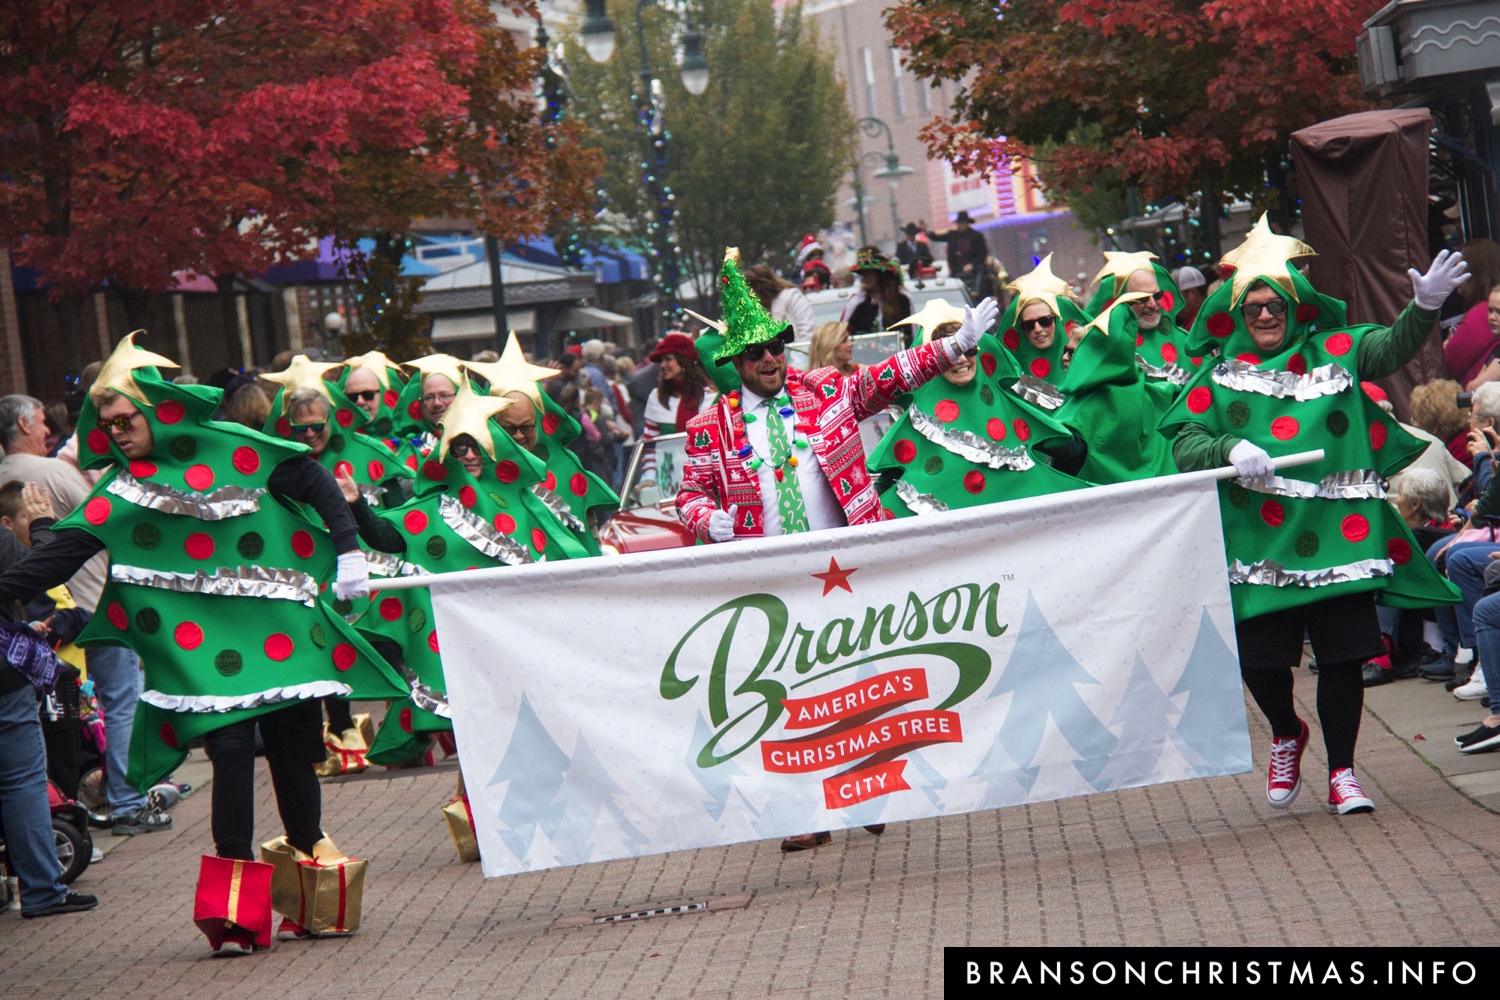 Kick off the holiday season with the Most Wonderful Time of Year parade